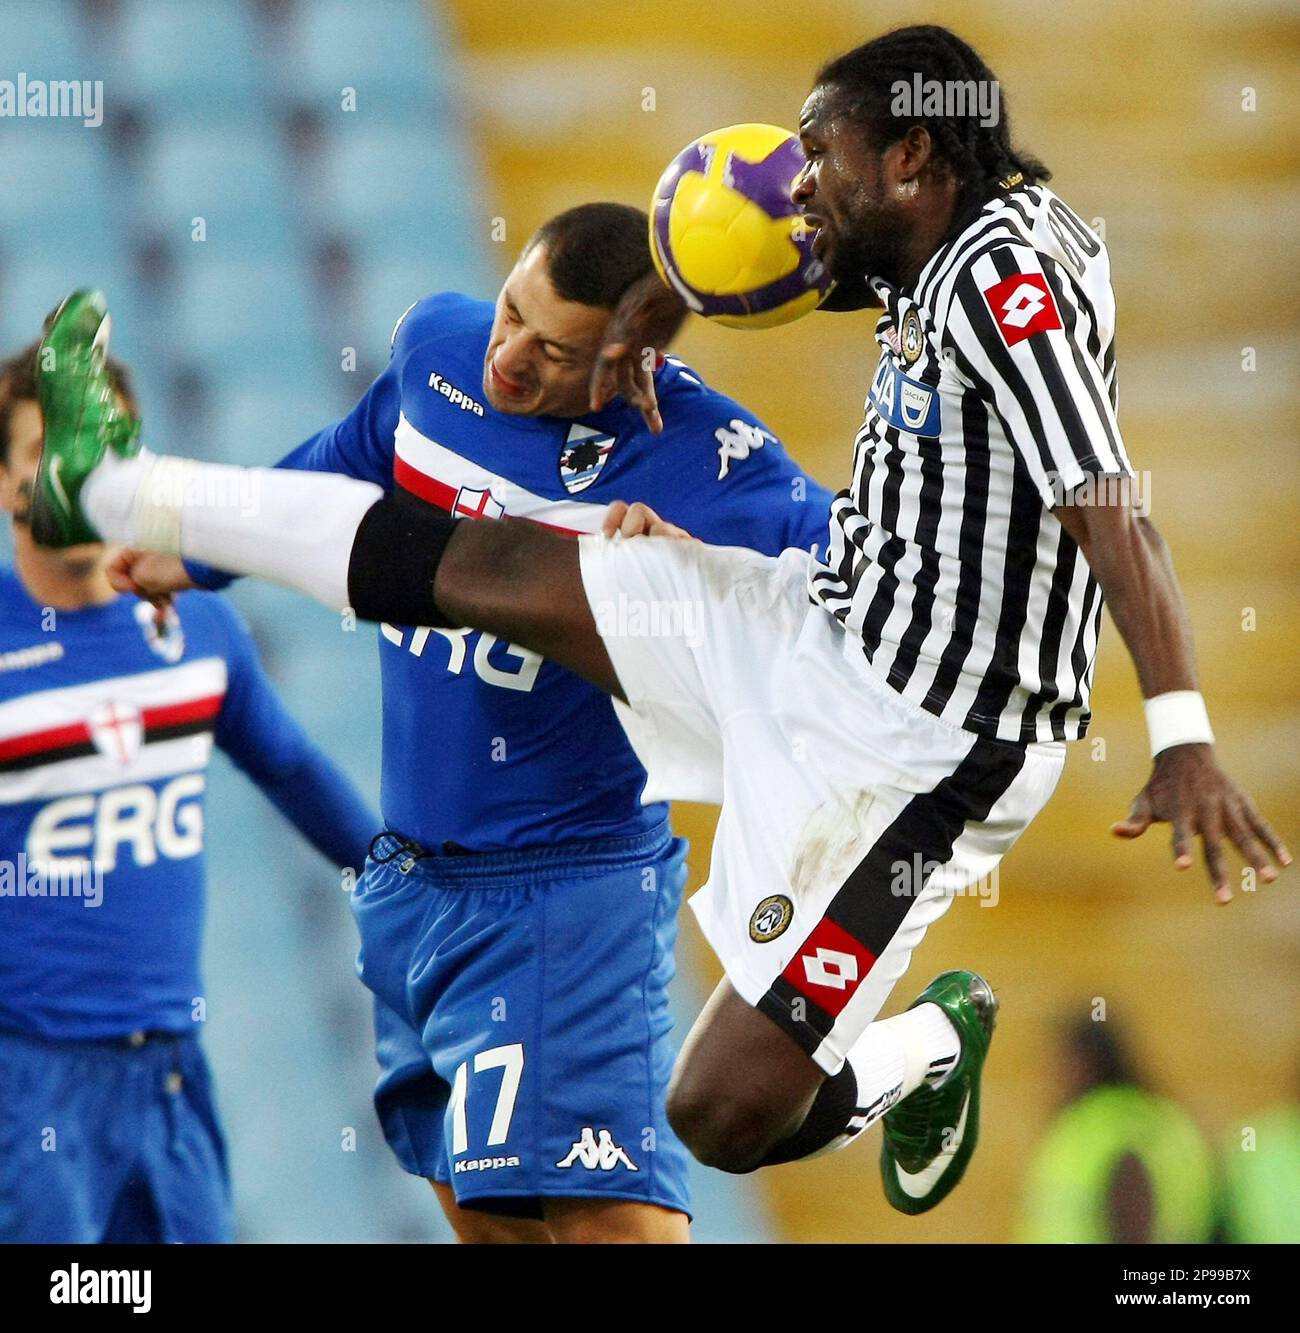 Udinese midfielder Christian Obodo, right, of Nigeria, jumps for he ball  with Sampdoria midfielder Angelo Palombo during the Serie A soccer match at  the Friuli stadium, in Udine, Italy, Sunday, Jan 11,